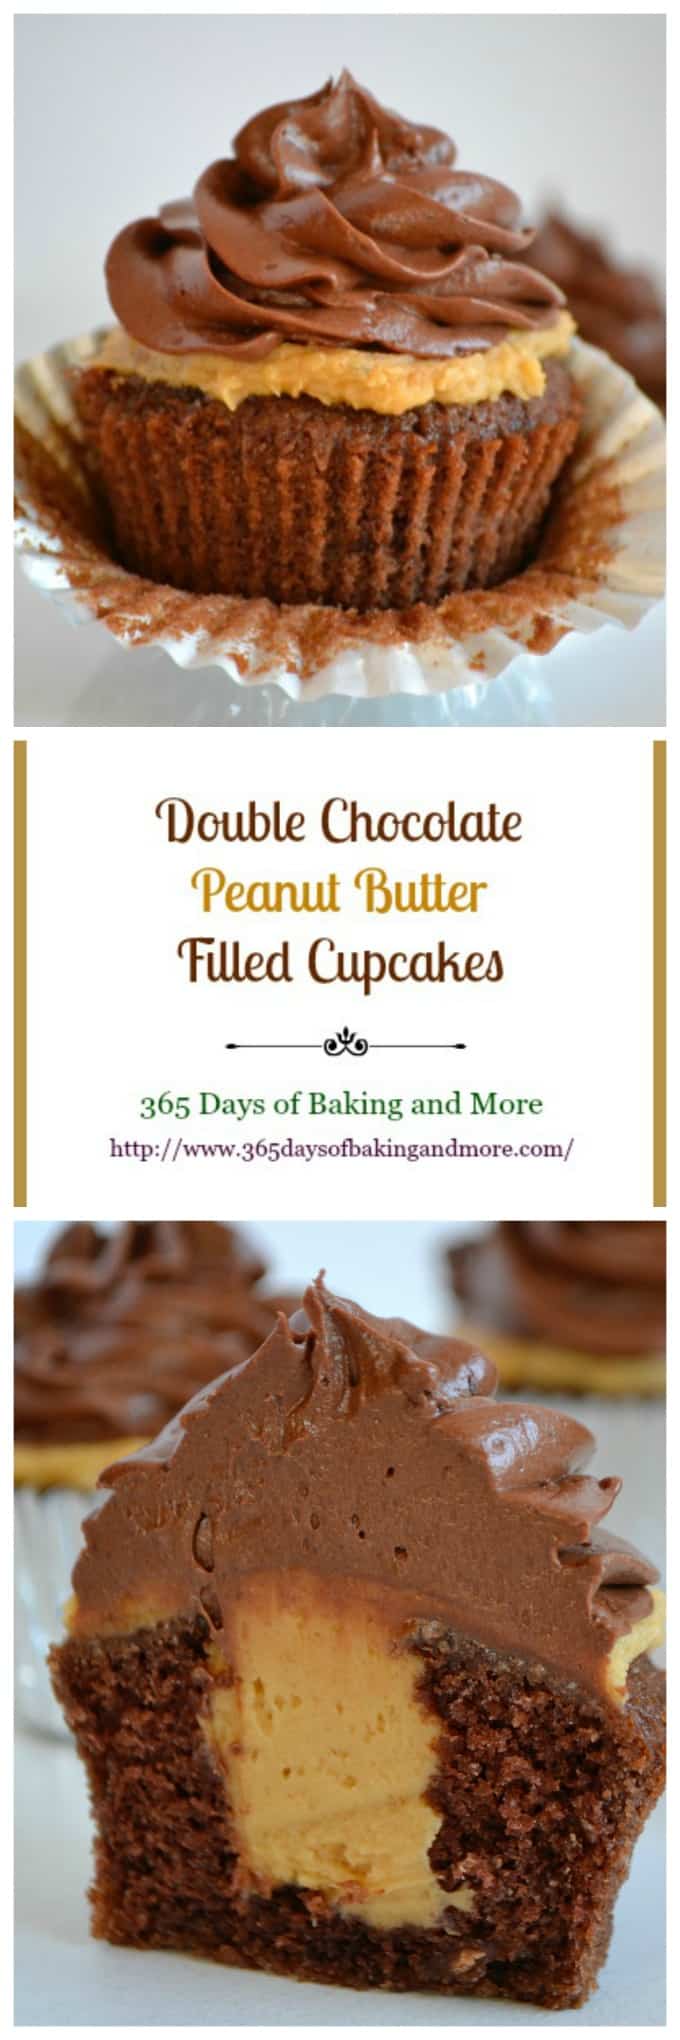 Double Chocolate Peanut Butter Filled Cupcakes